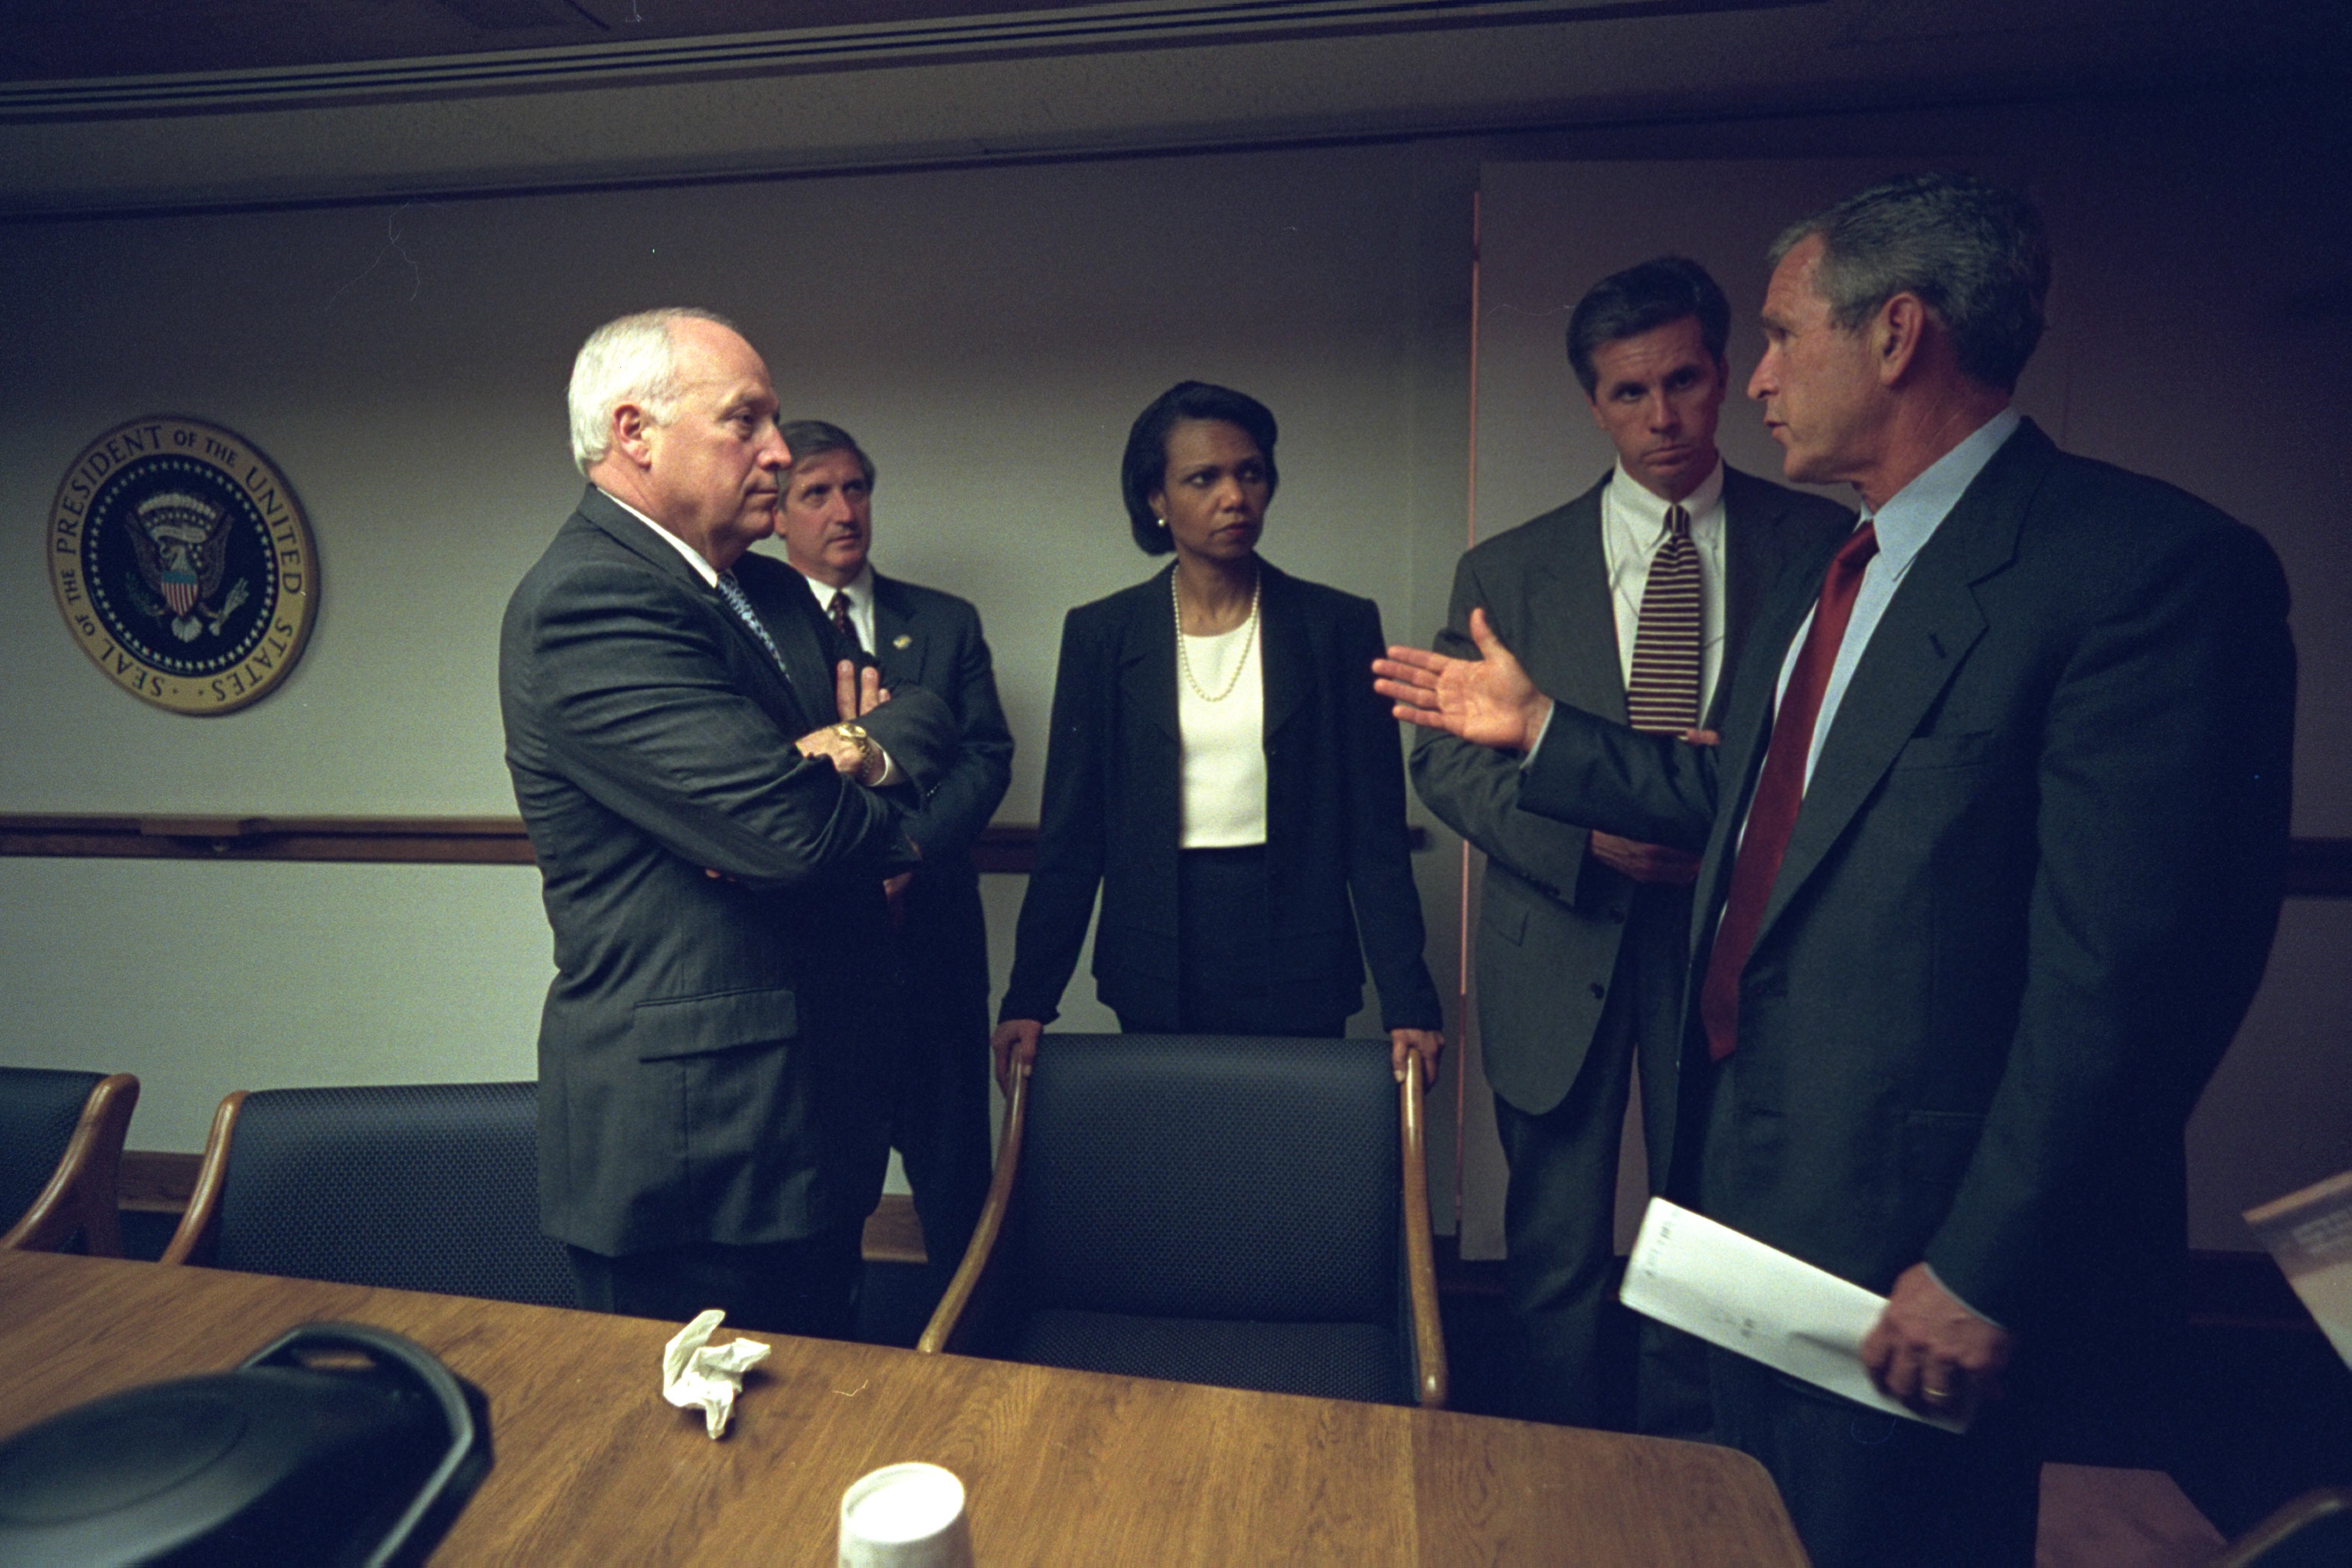 After returning to the White House, September 11, 2001, President George W. Bush meets with advisors in the Presidential Emergency Operations Center in the White House.